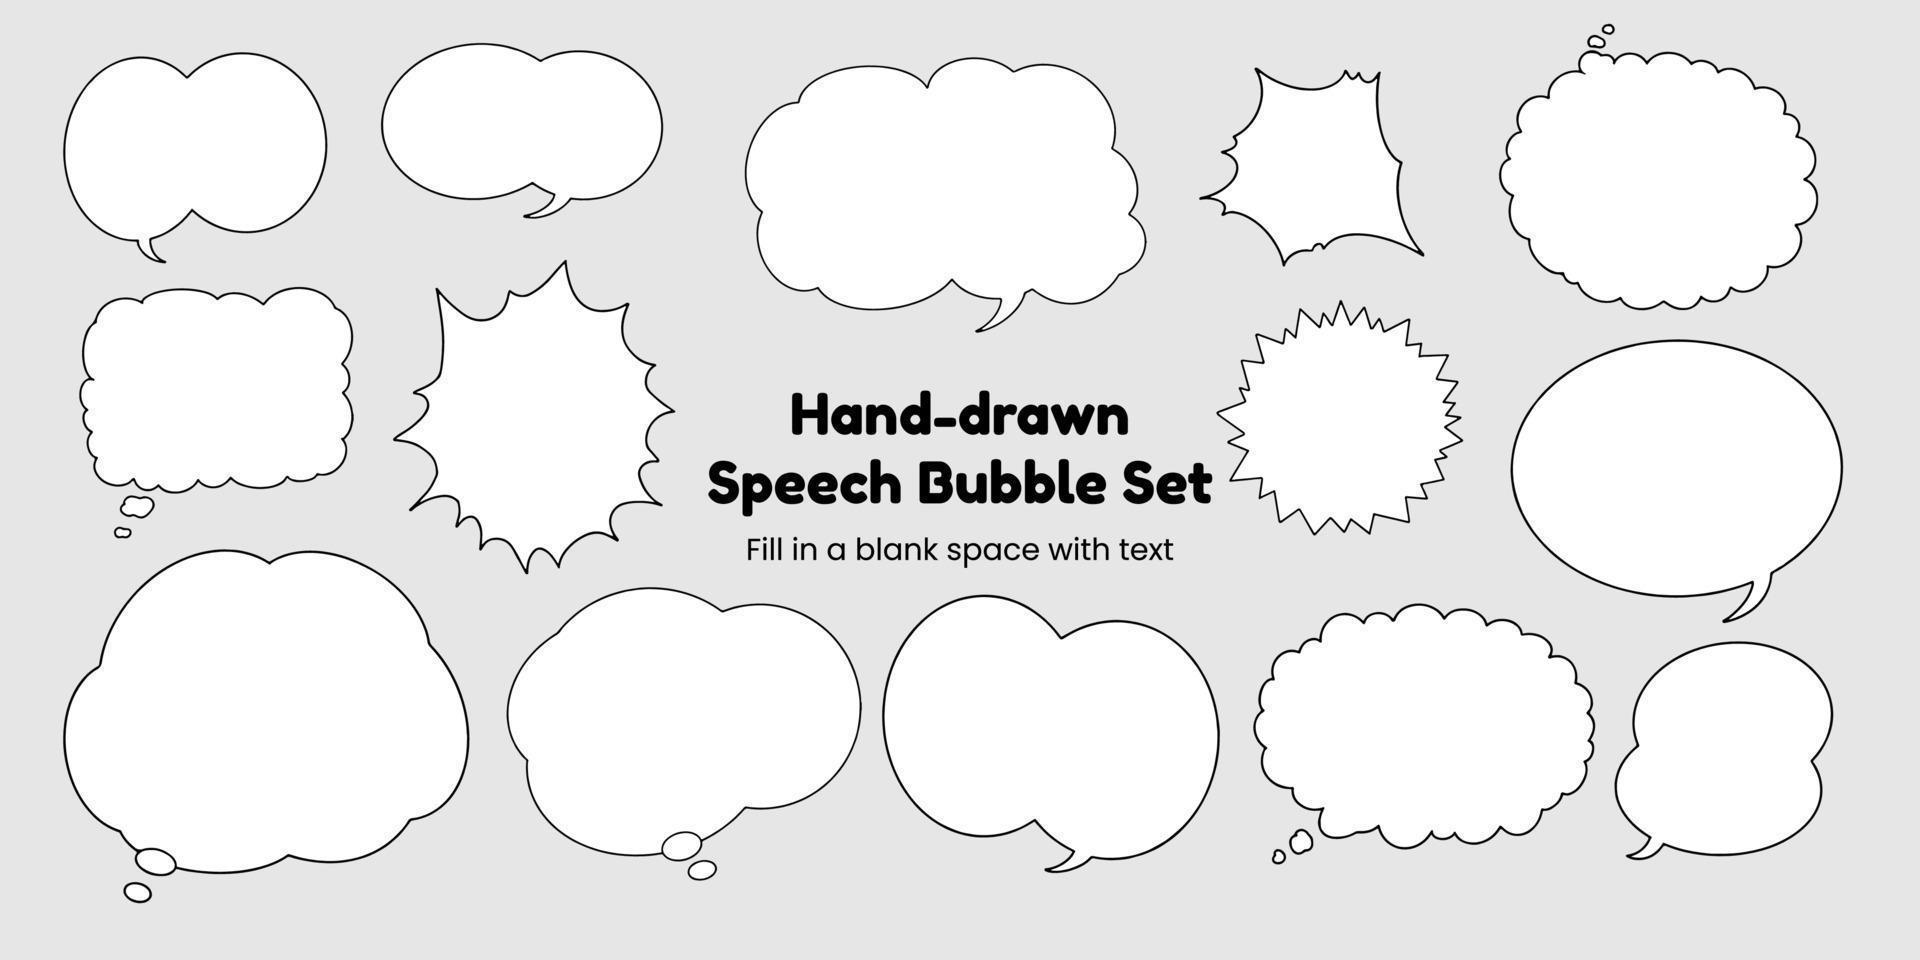 Set of simple, hand-drawn speech bubbles or balloons, including dialogue, comic text, and word balloons. Vector illustrations.